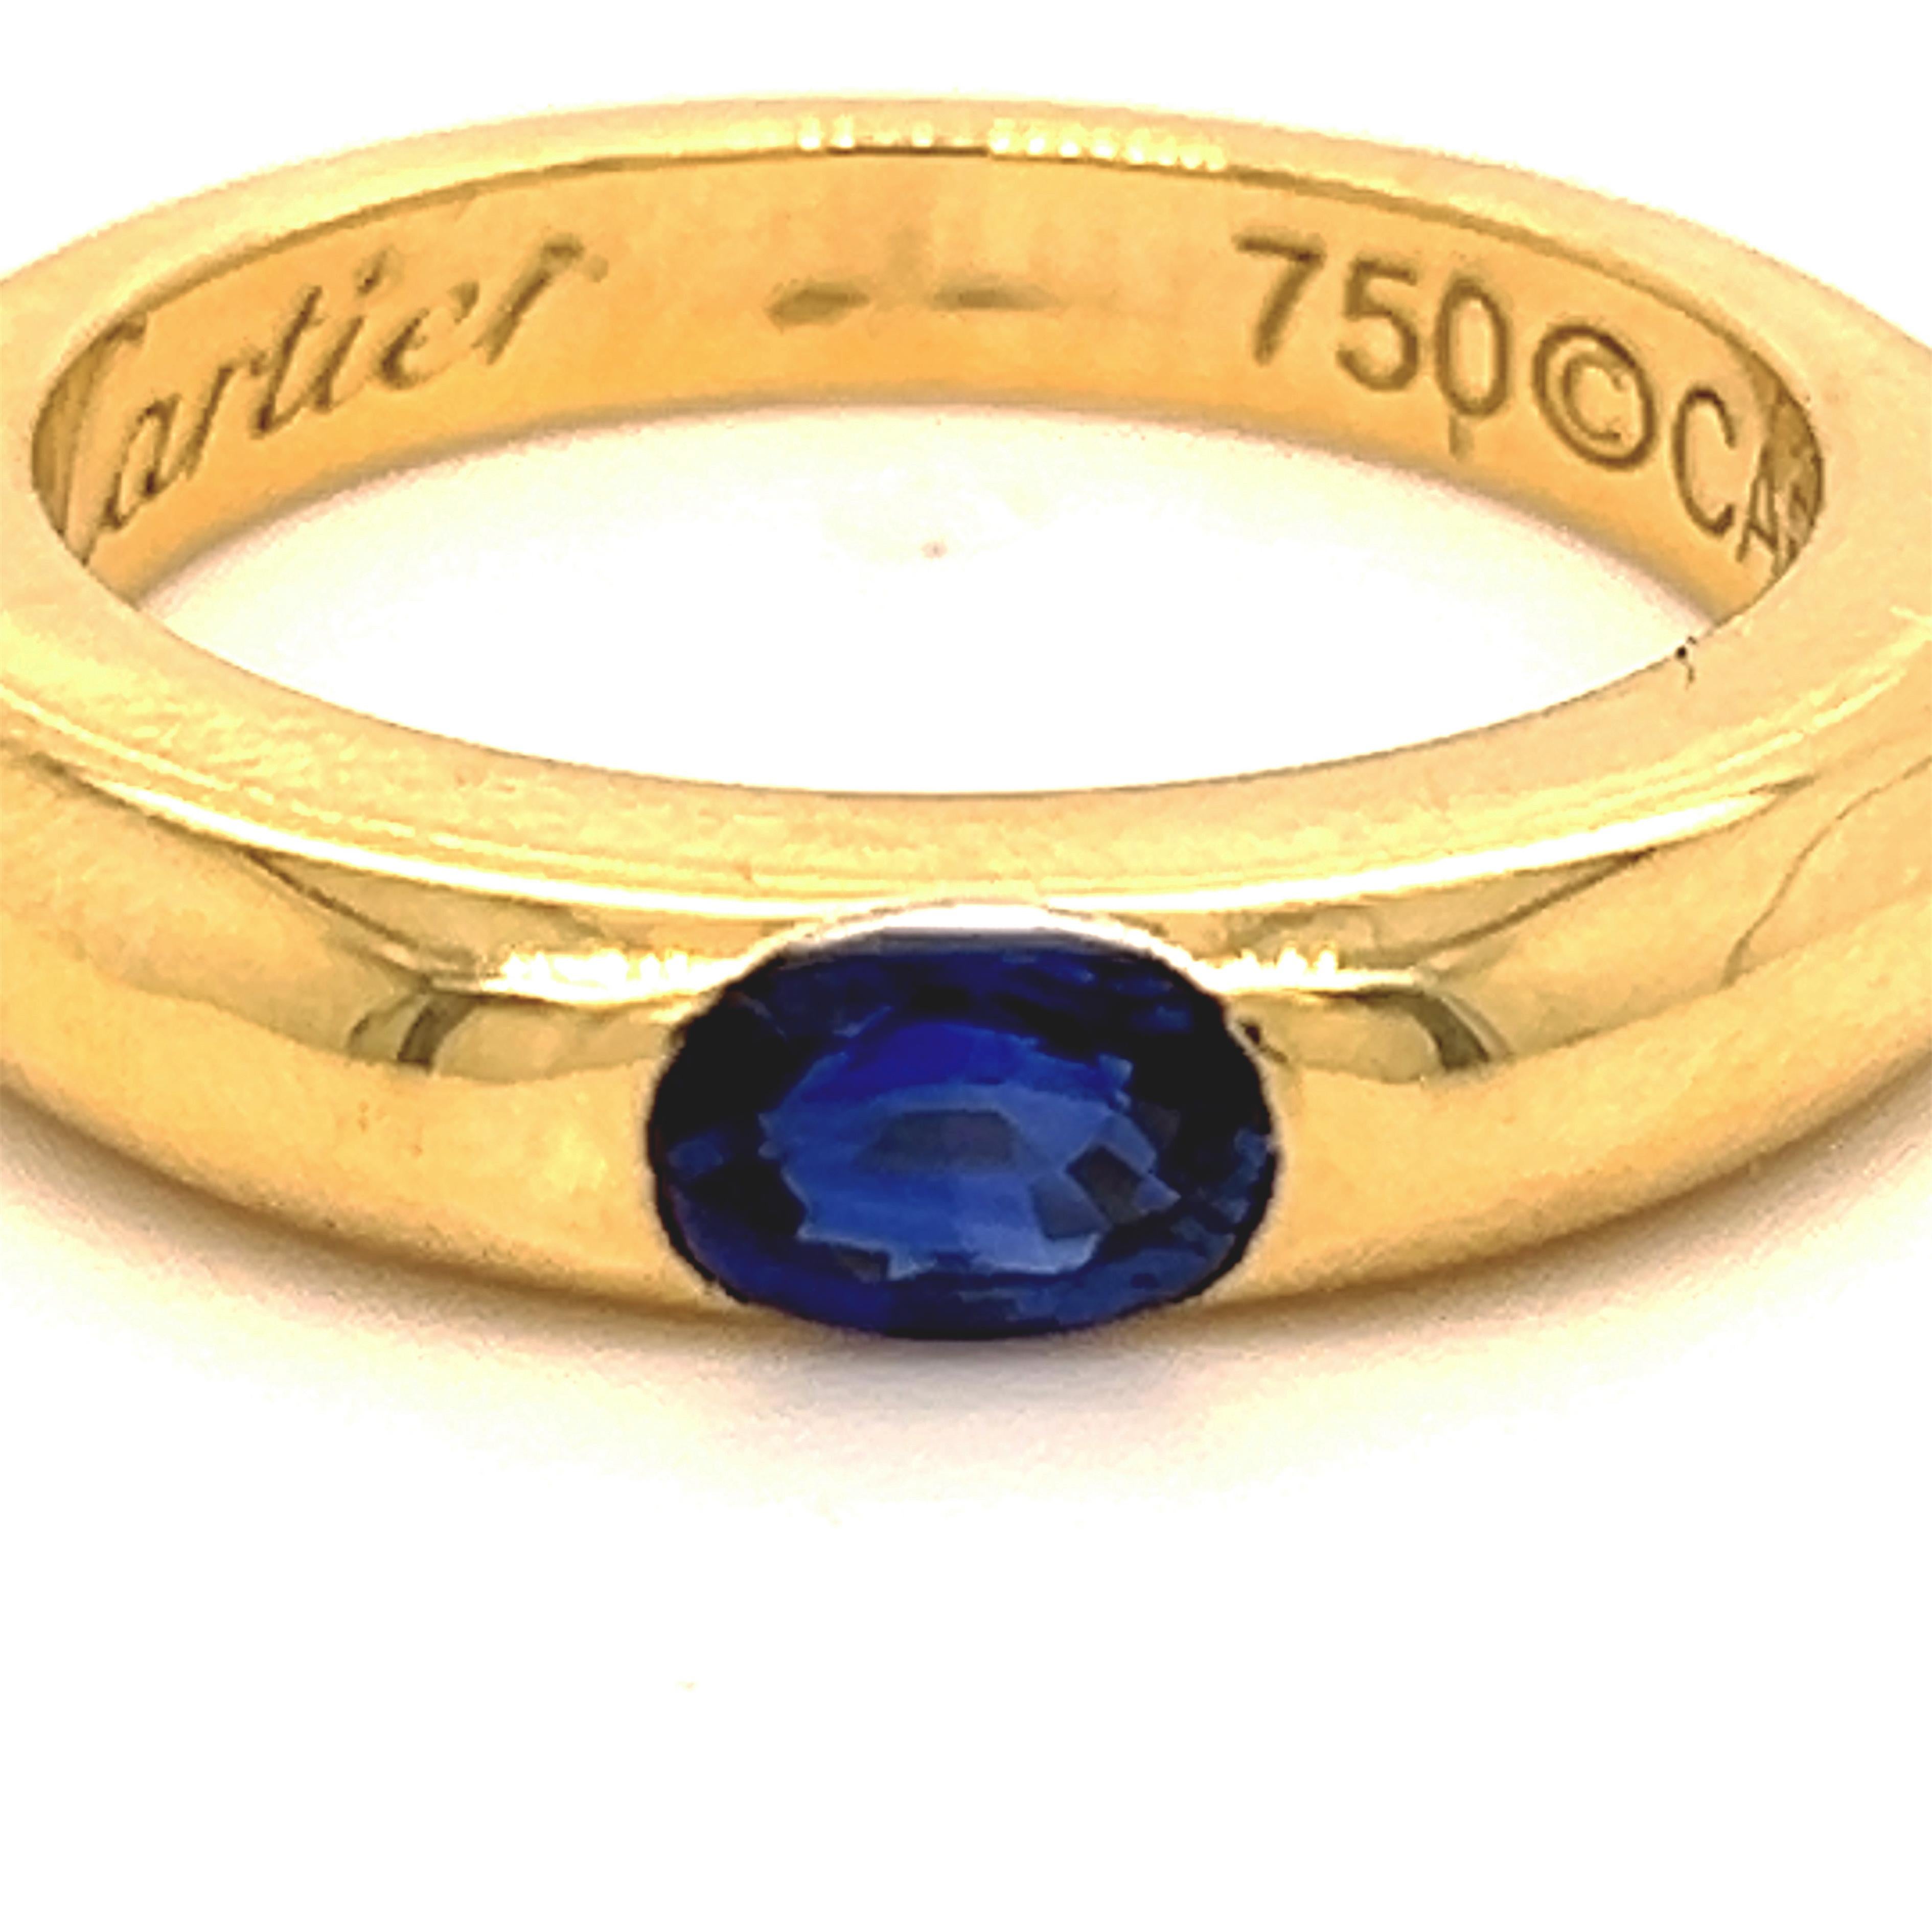 Original 1992, Cartier Oval Royal Blue Sapphire 18Kt Yellow Gold iconic Ellipse ring, French size 53, US Size 6 1/2.
A very precious Cartier circa 0.71KT Top Quality Oval Sapphire in a simple, all time wearable 18kt yellow gold setting timeless ring